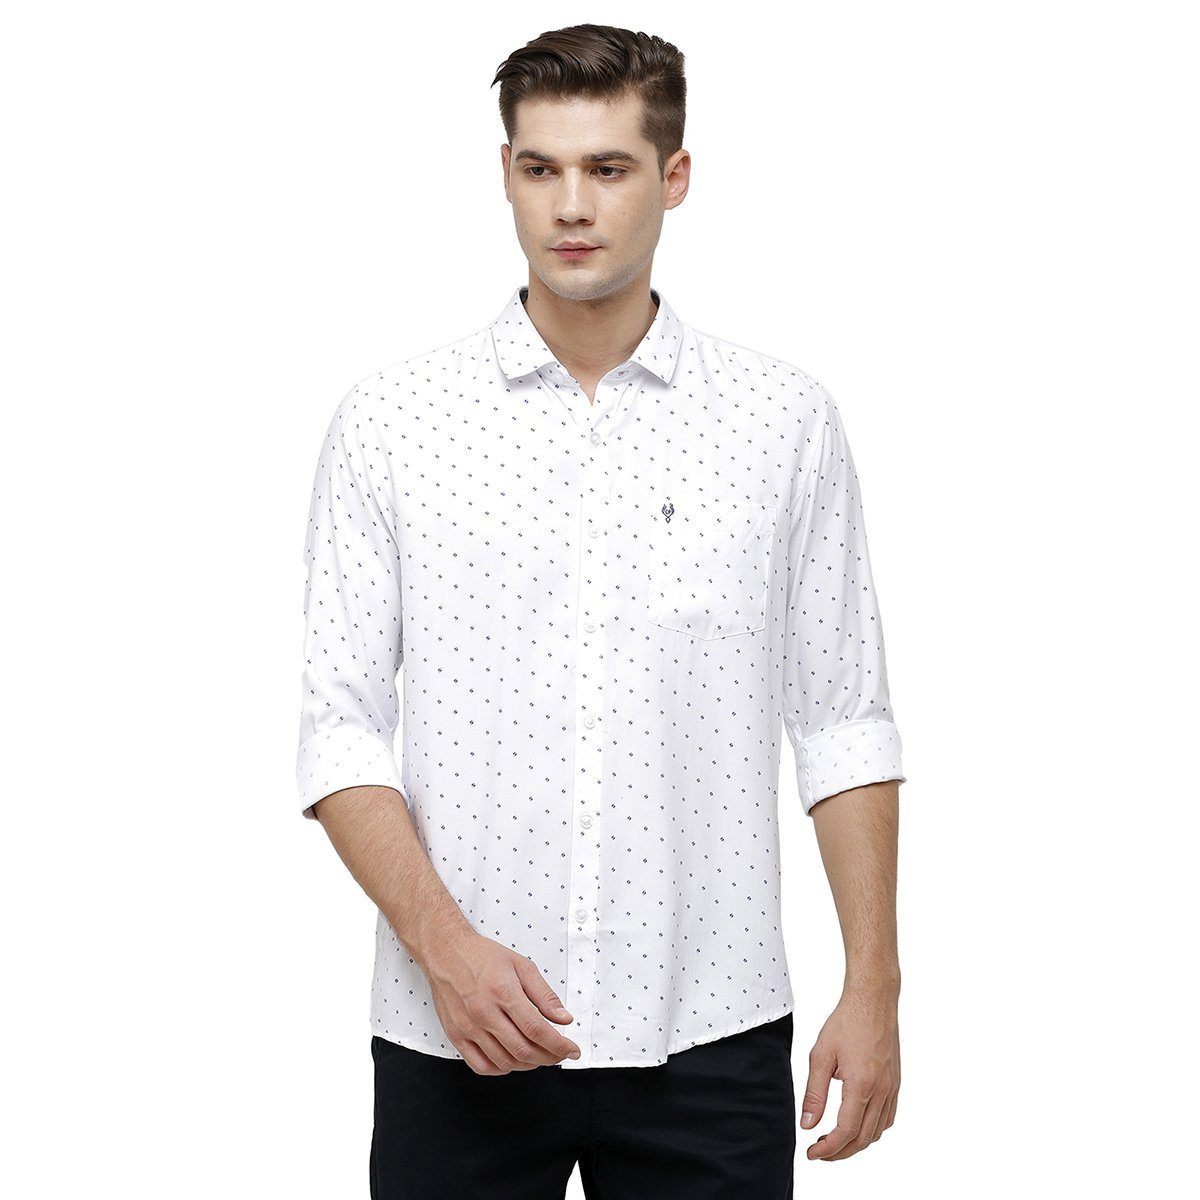 Classic Polo Mens Collar Neck Full Sleeve White Smart Fit 100% Cotton Woven Shirt SM1-79 A-FS-PRT-SF Shirts Classic Polo 